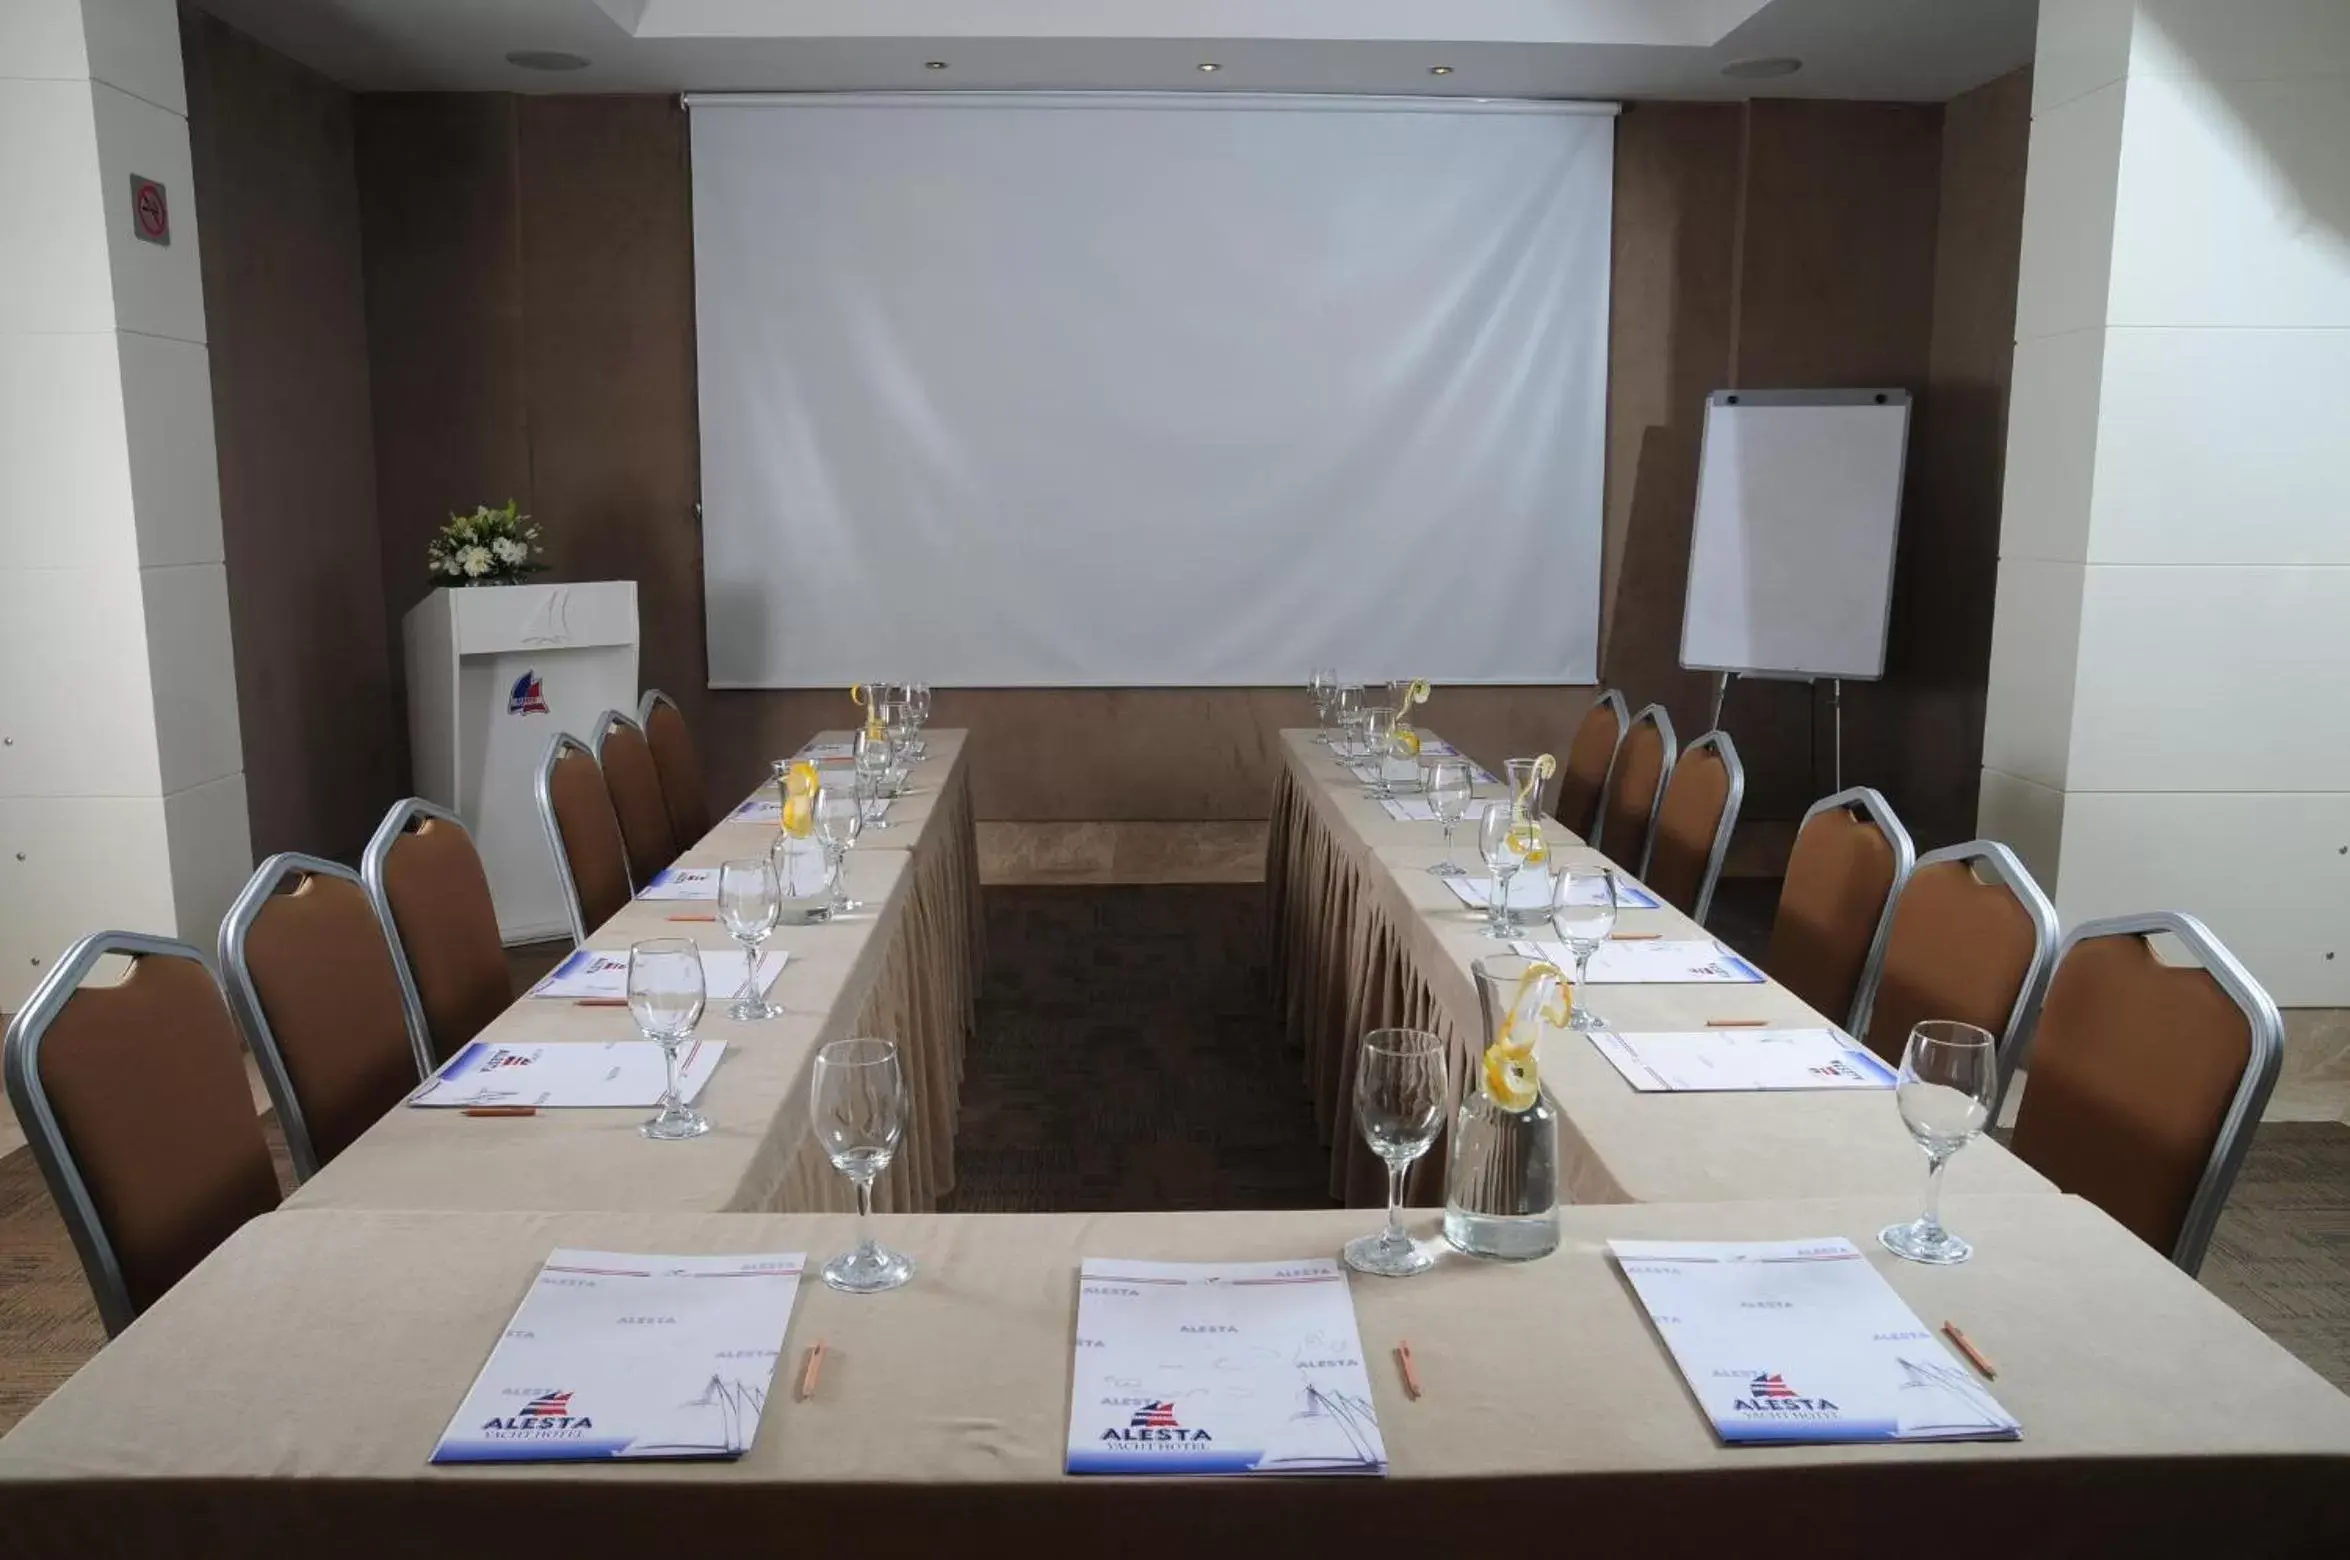 Business facilities in Alesta Yacht Hotel